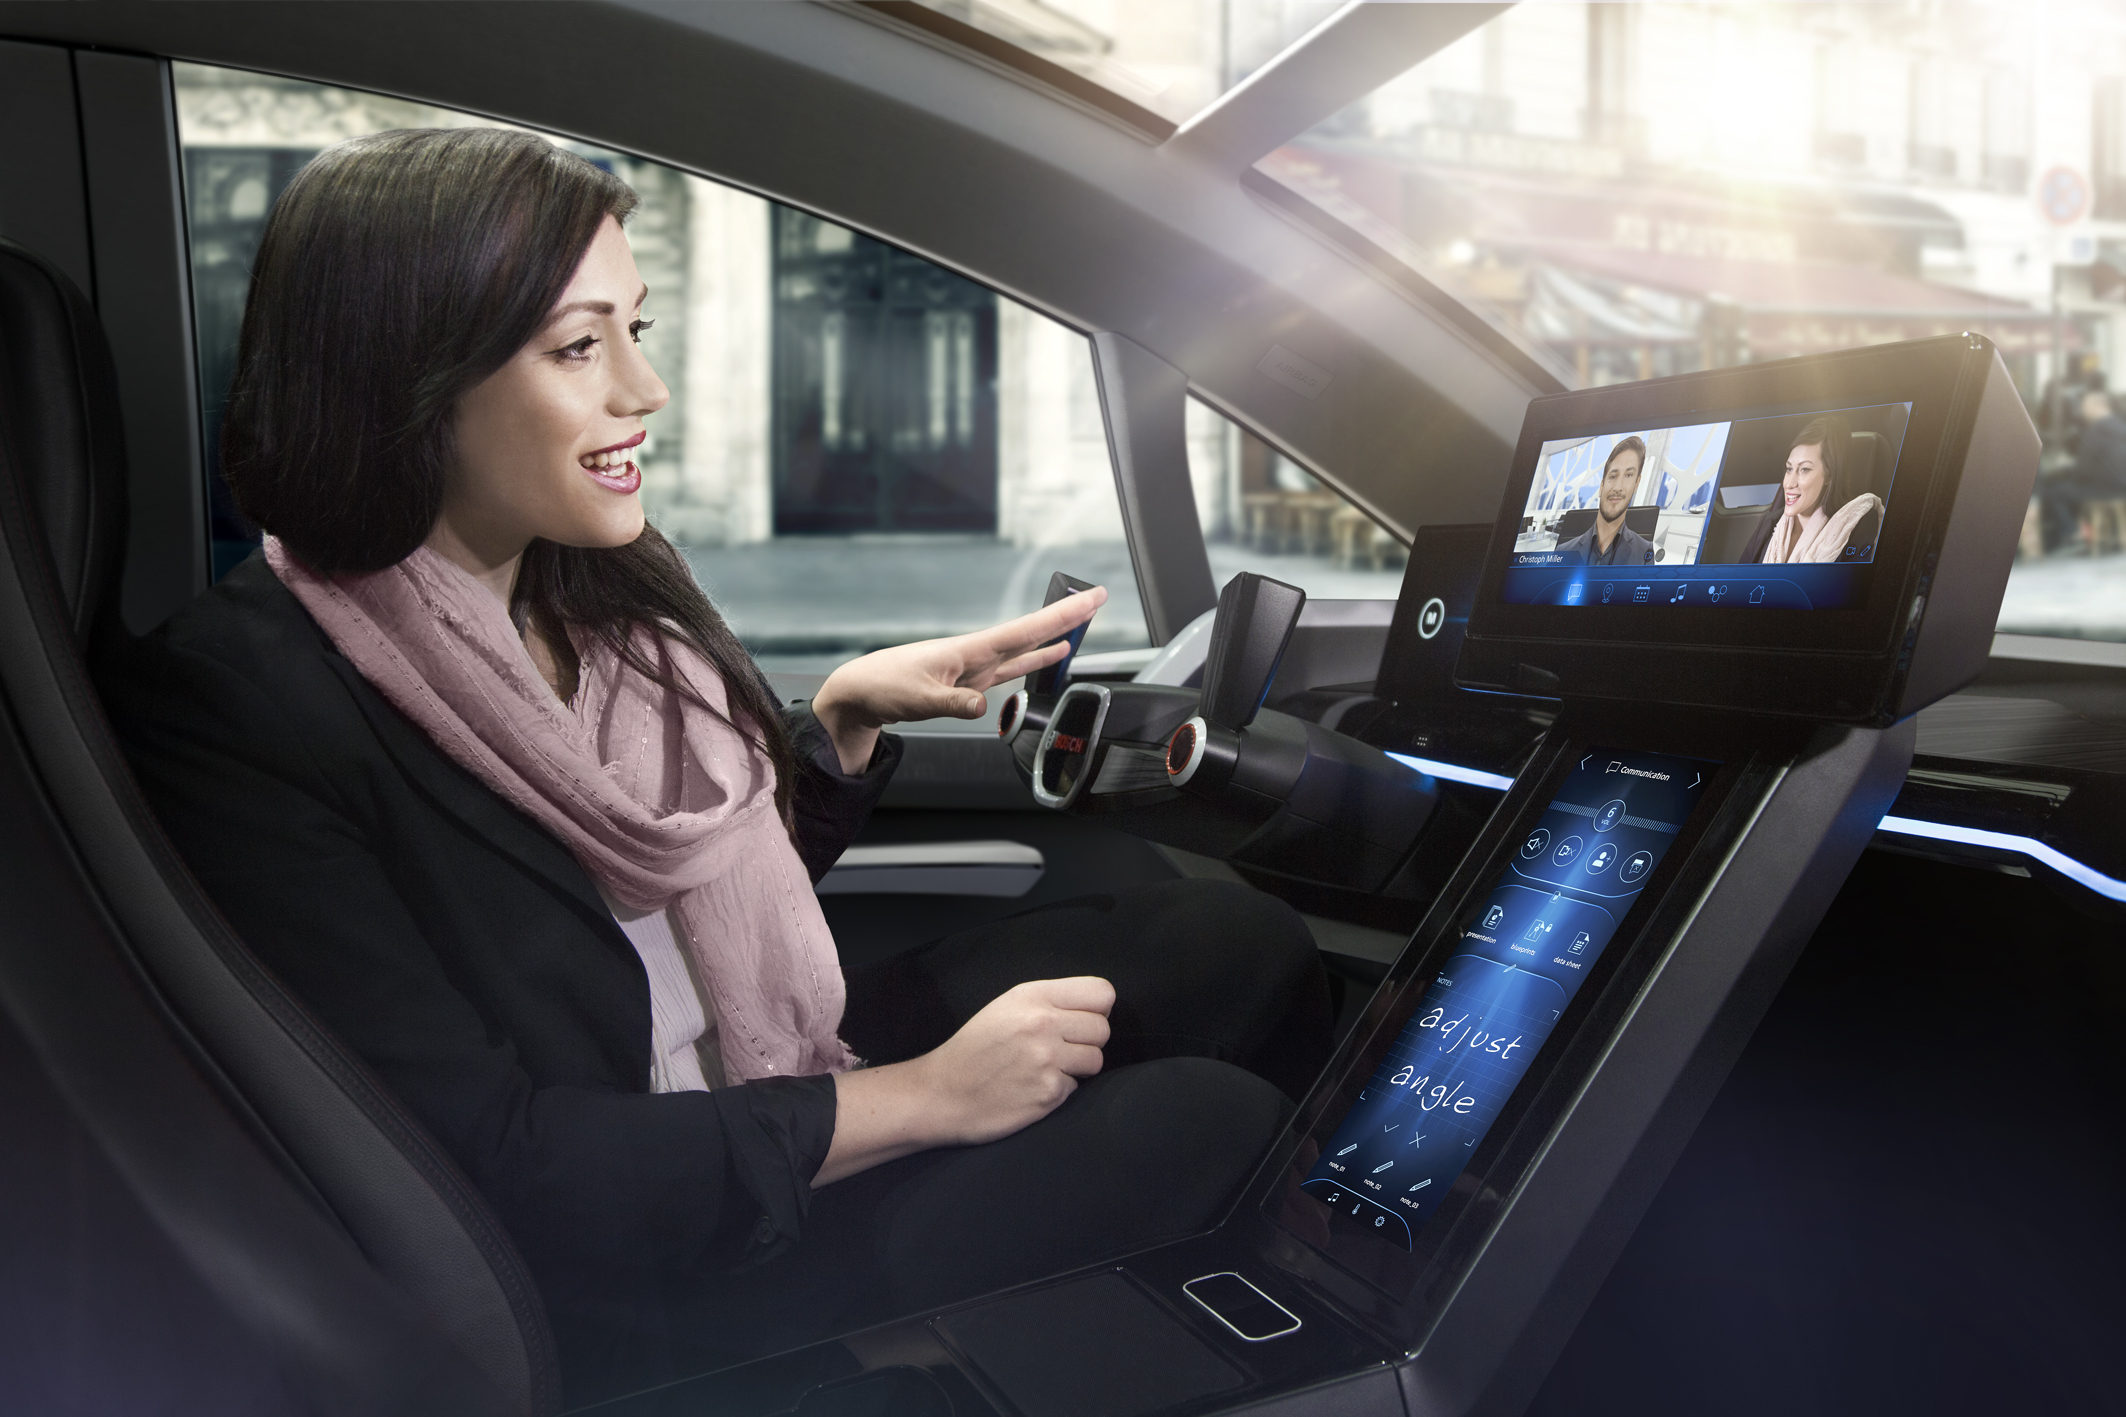 Human Machine Interface – the communication between car and driver